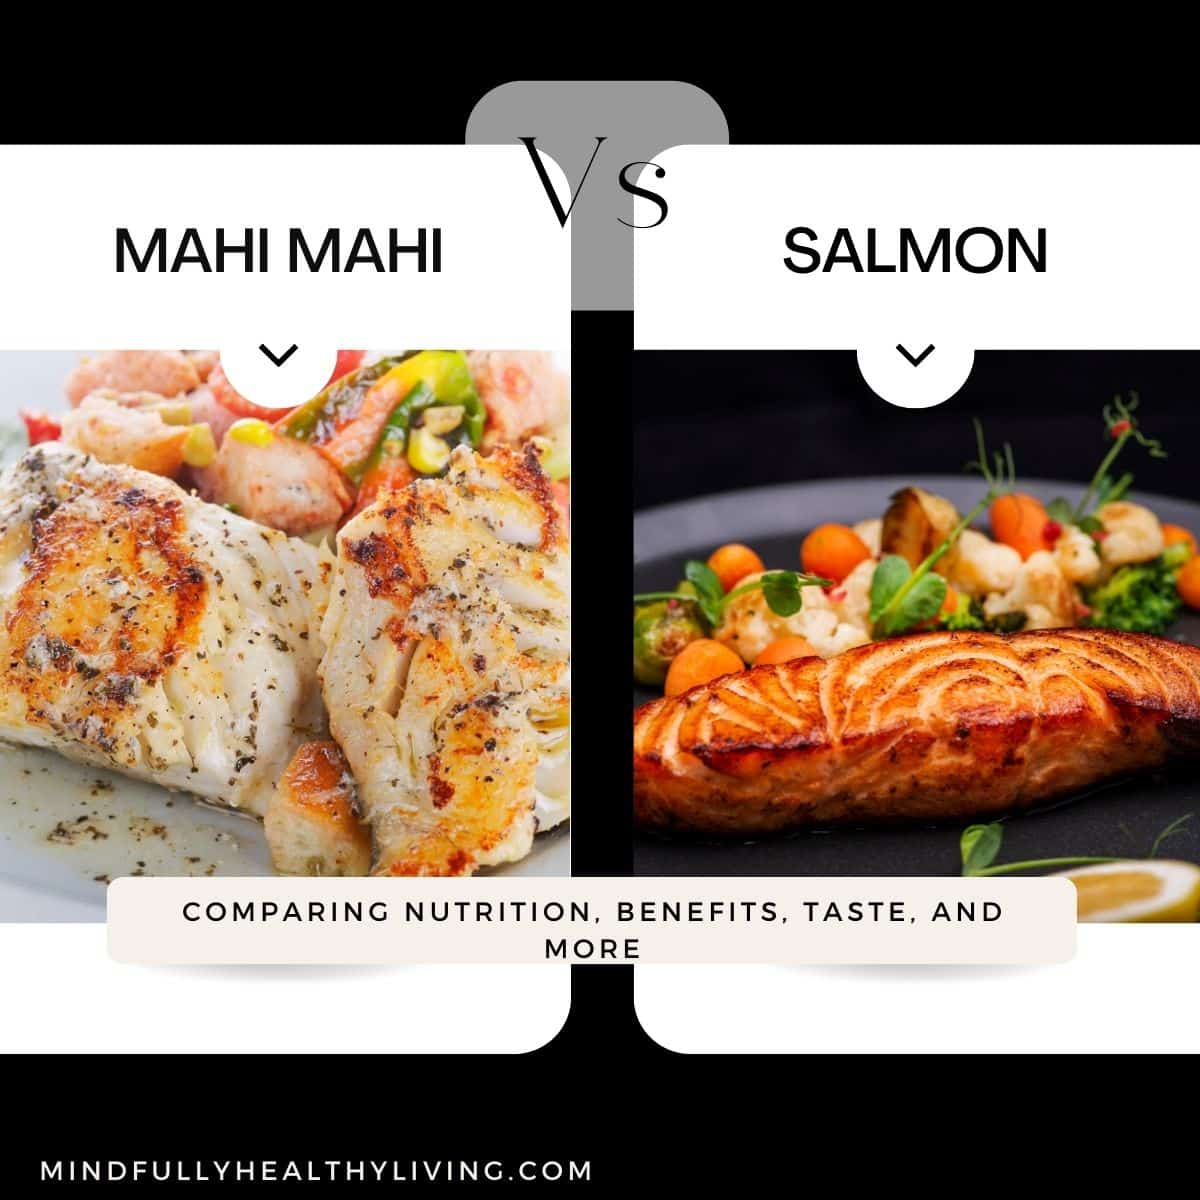 The main photo for this article has a black background and rounded white squares with photos in them and text overlay. The photos have a piece of cooked Mahi Mahi and salmon, one in each square, respectively. The text overlay says Mahi Mahi vs Salmon: Comparing nutrition, benefits, taste, and more. mindfullyhealthyliving.com